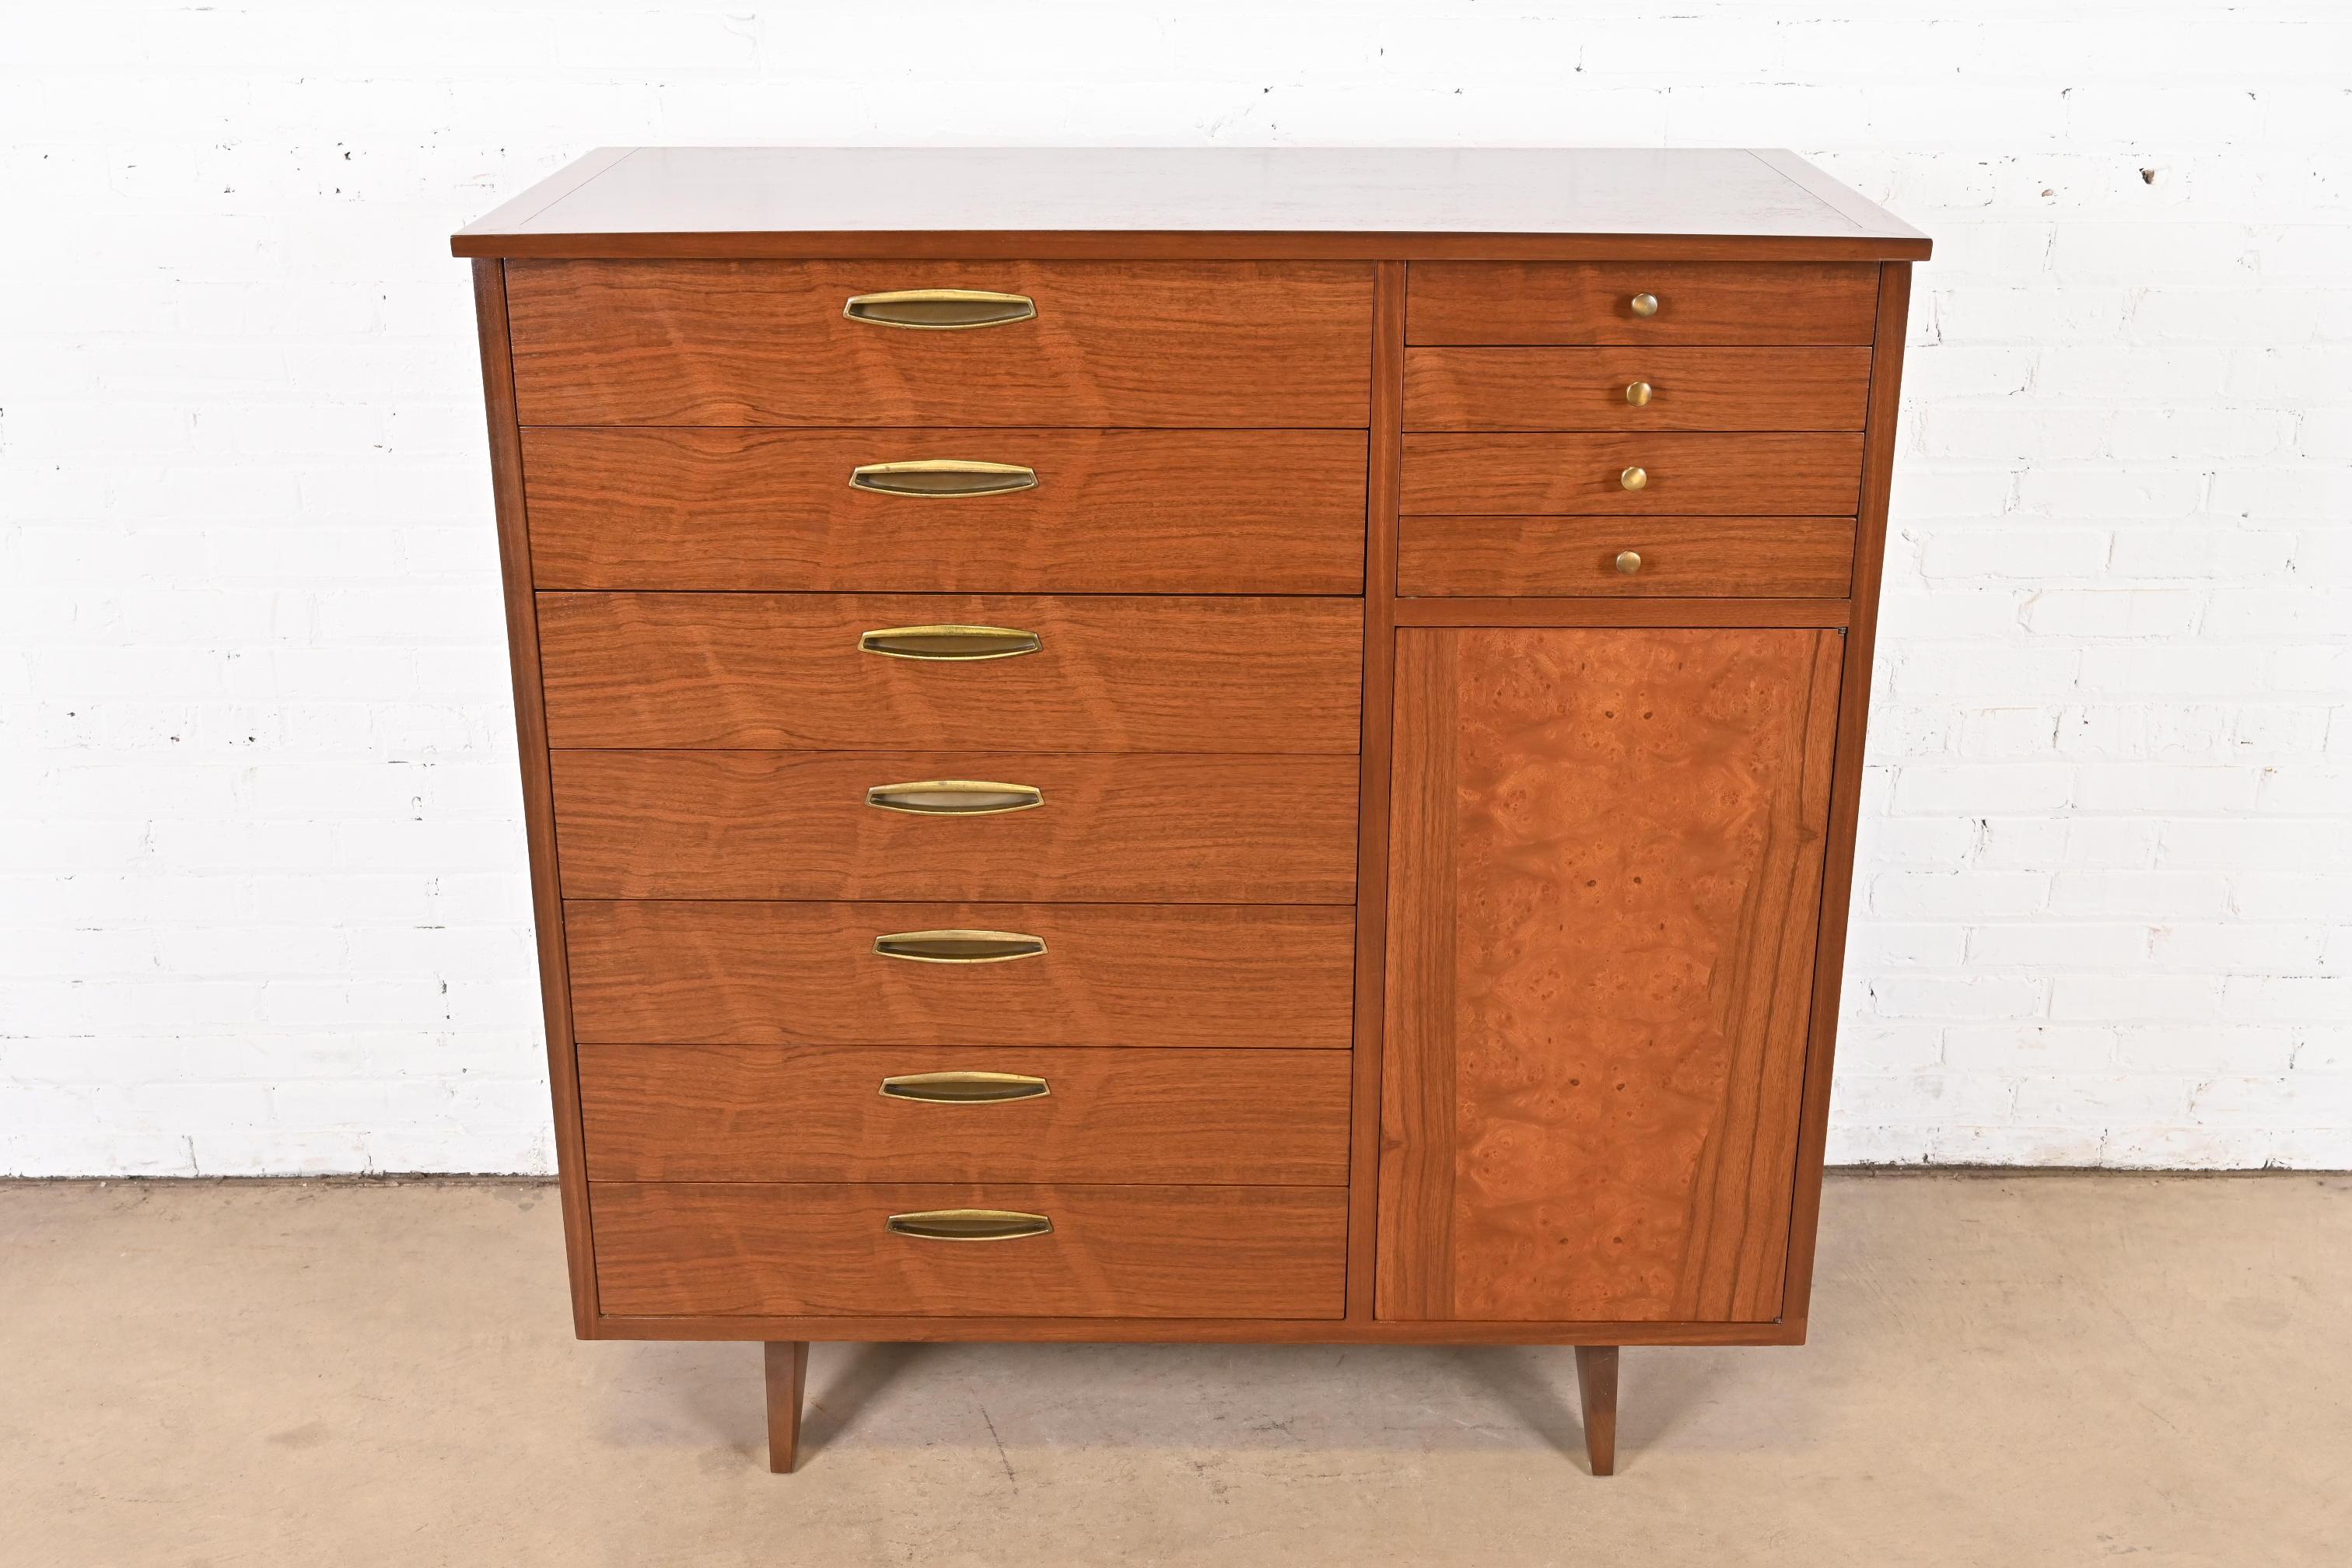 A very rare and exceptional mid-century Organic Modern gentleman's chest or highboy dresser

By George Nakashima for Widdicomb Furniture, 